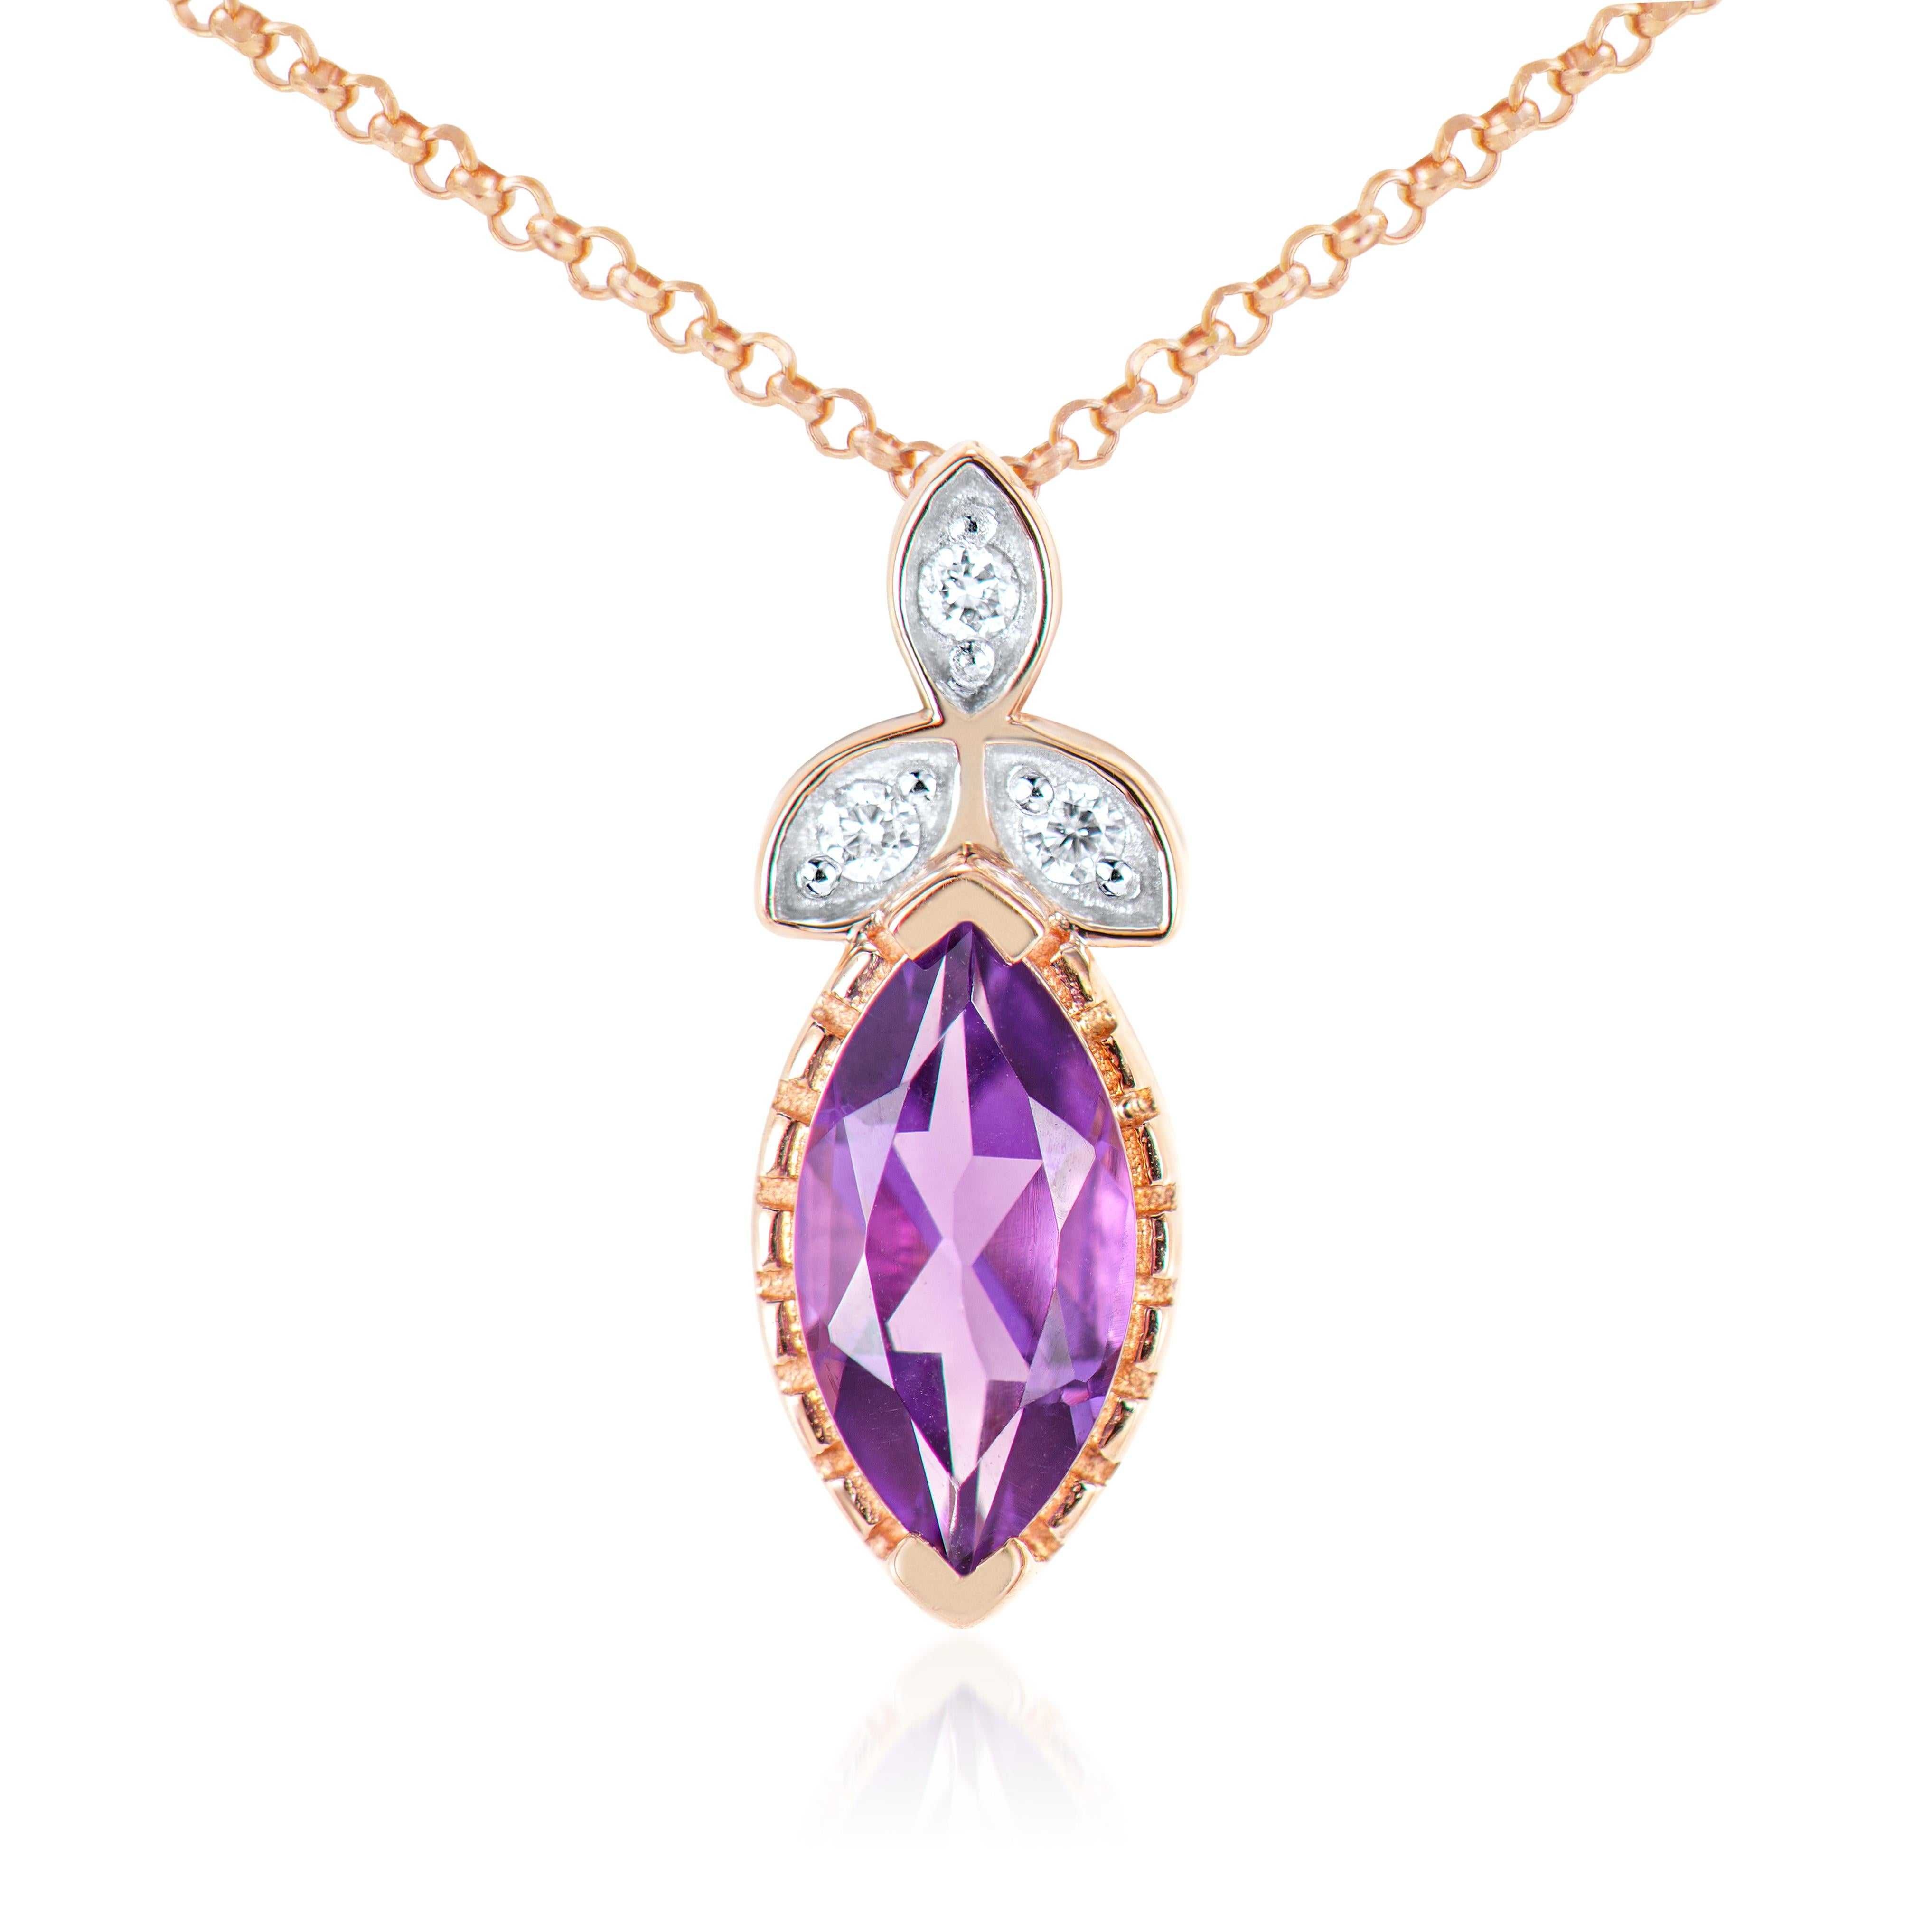 Contemporary 0.45 Carat Amethyst Pendant in 14Karat Rose Gold with White Diamond. For Sale